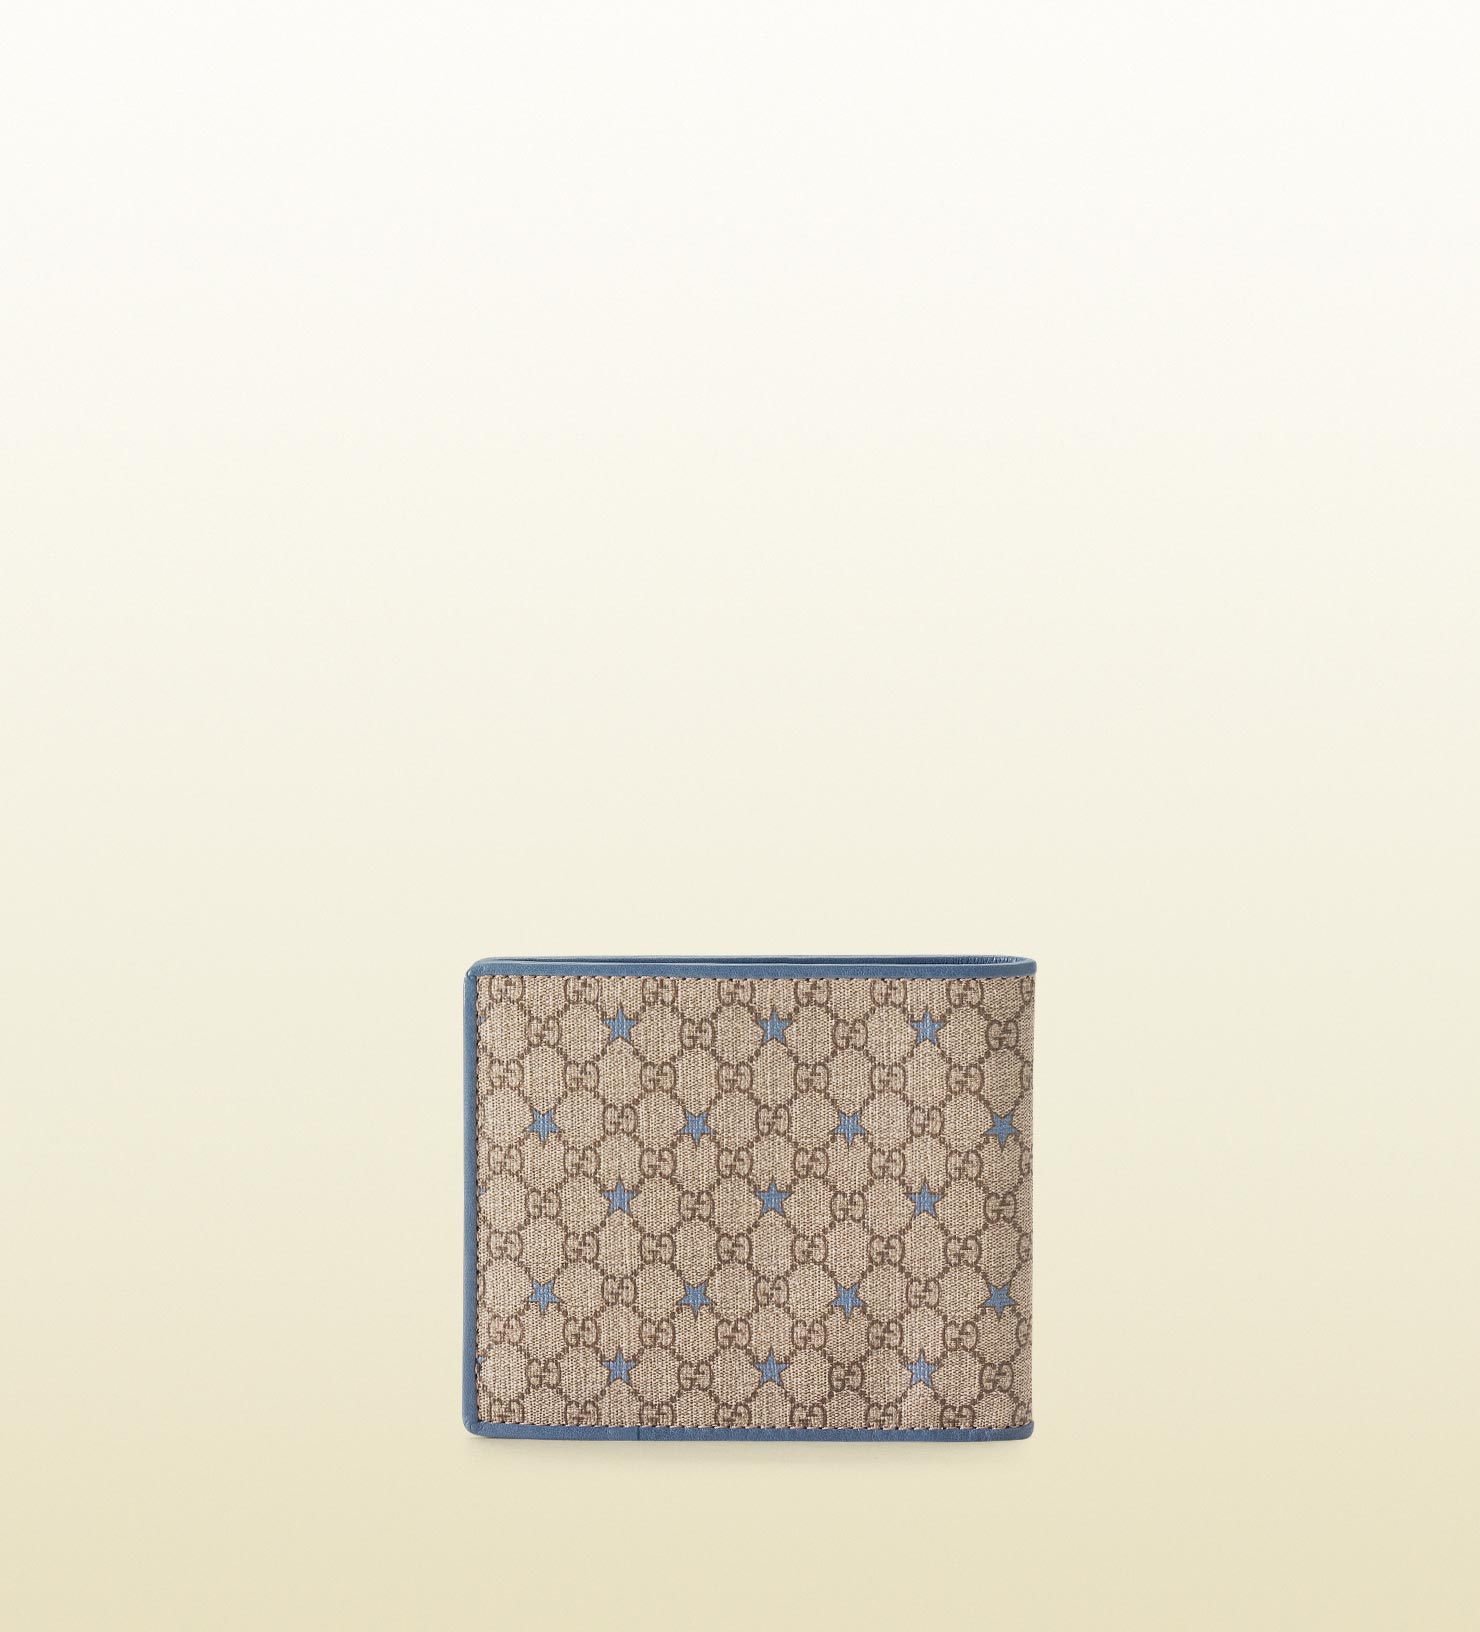 Gucci Micro Gg Supreme Stars Canvas Bifold Wallet in Beige (Natural) for Men - Lyst